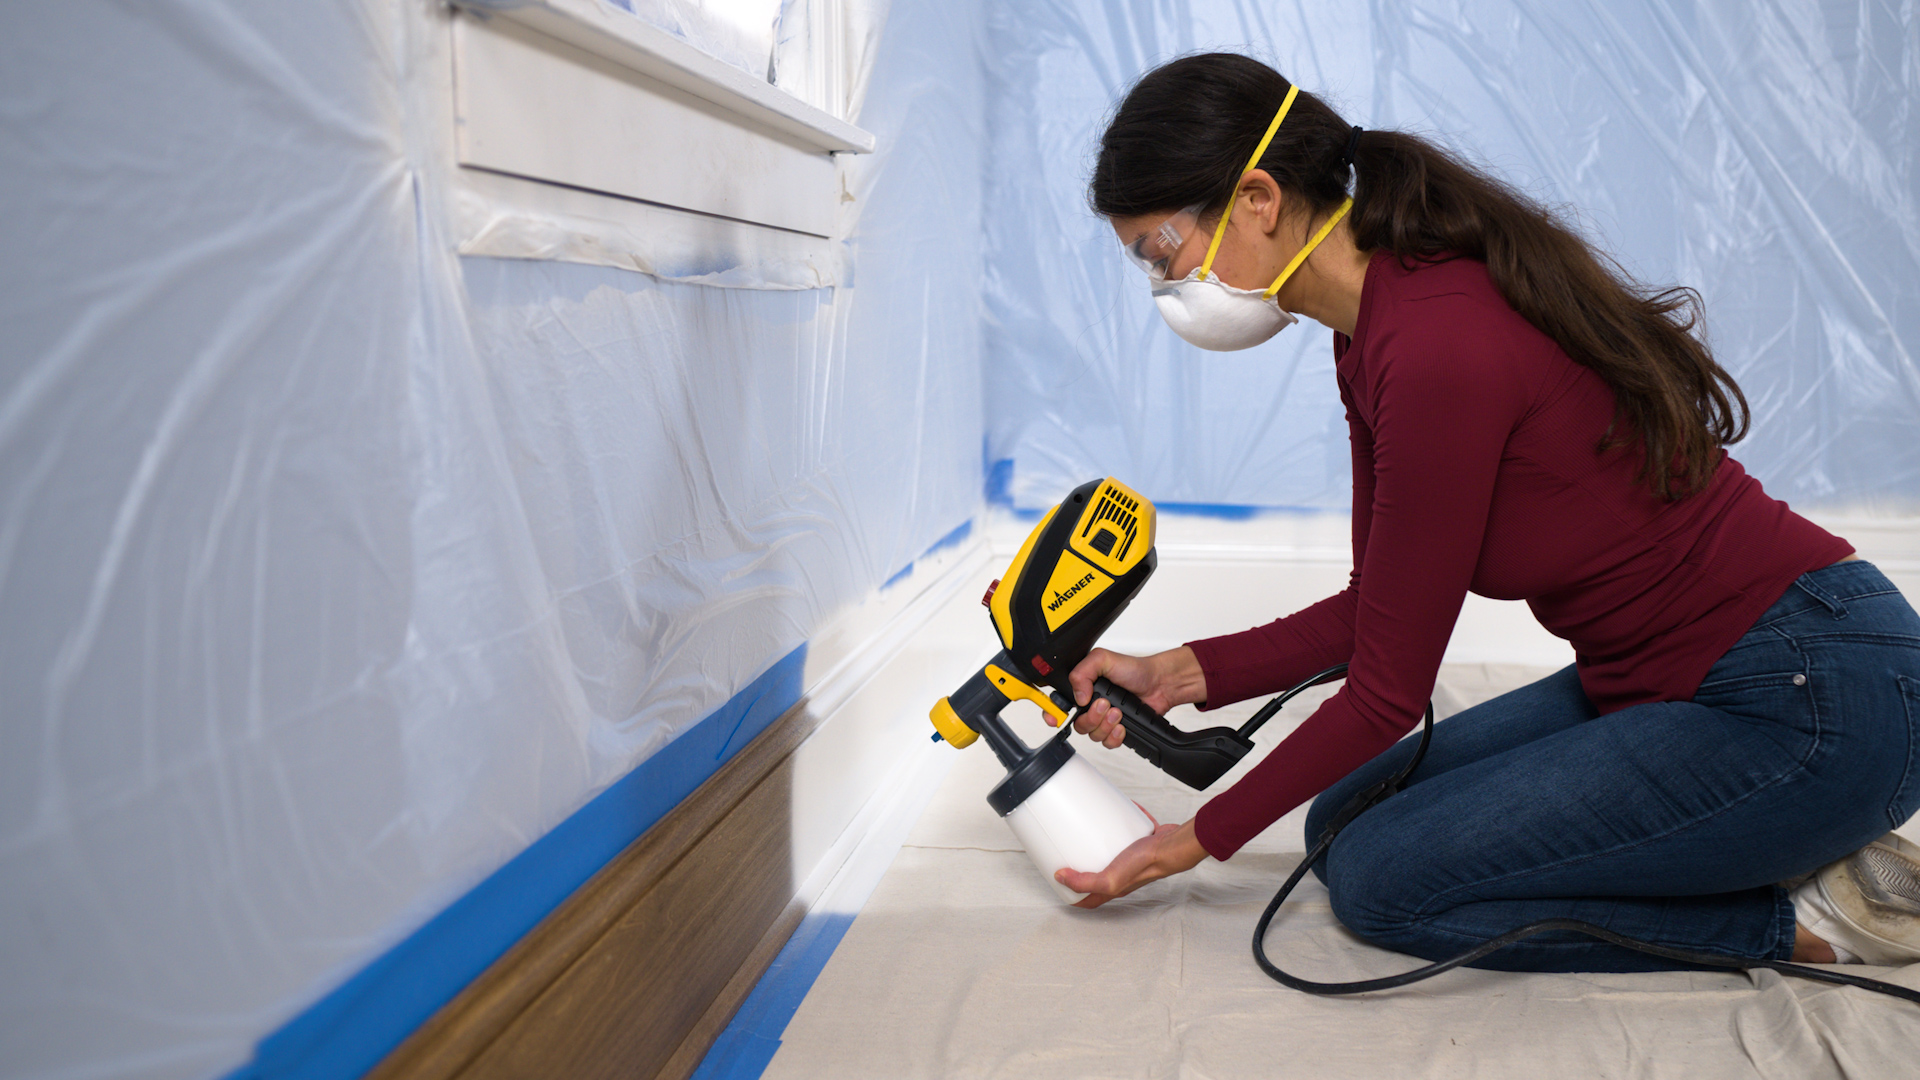 How to Paint Interior Trim with a Paint Sprayer